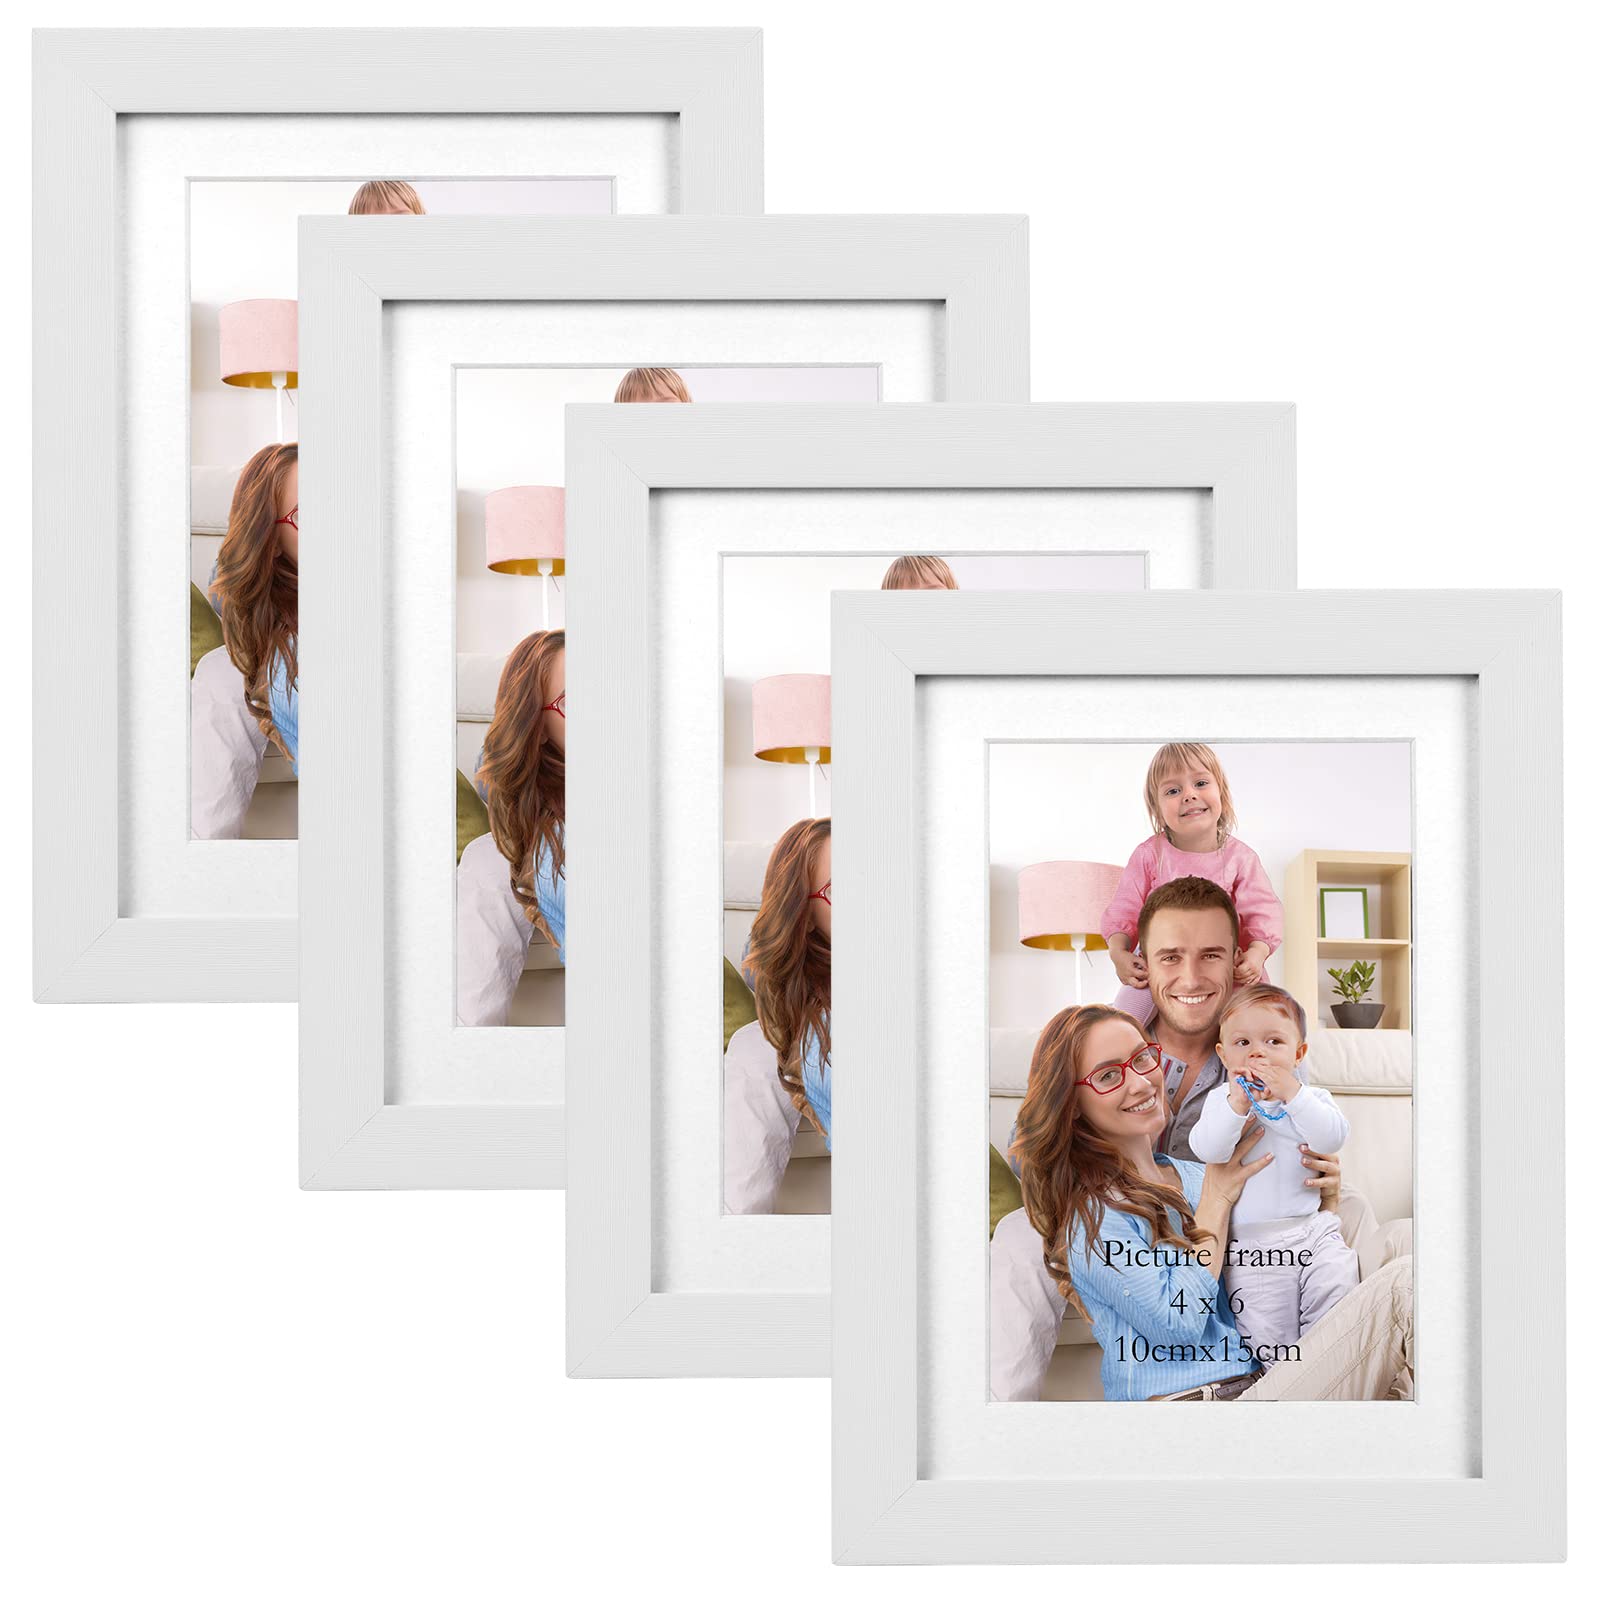 Giftgarden giftgarden 4x6 Picture Frame Set of 4 White Wood grain Frames  for 4x6 Photos with Mat or 5x7 Without Mat, Wall or Tabletop Displ